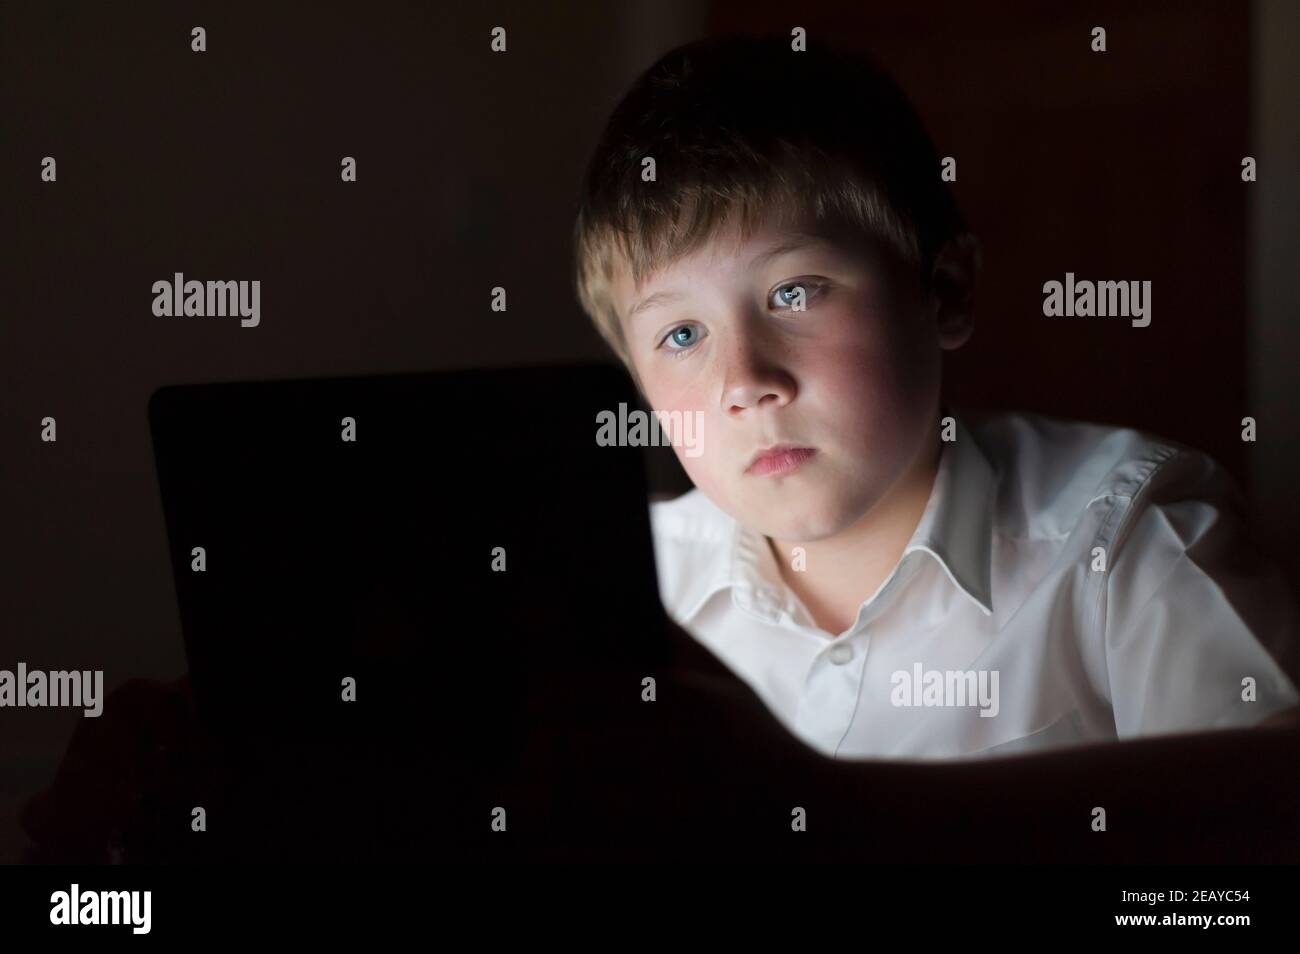 A 9 year old boy using a tablet in the evening Stock Photo